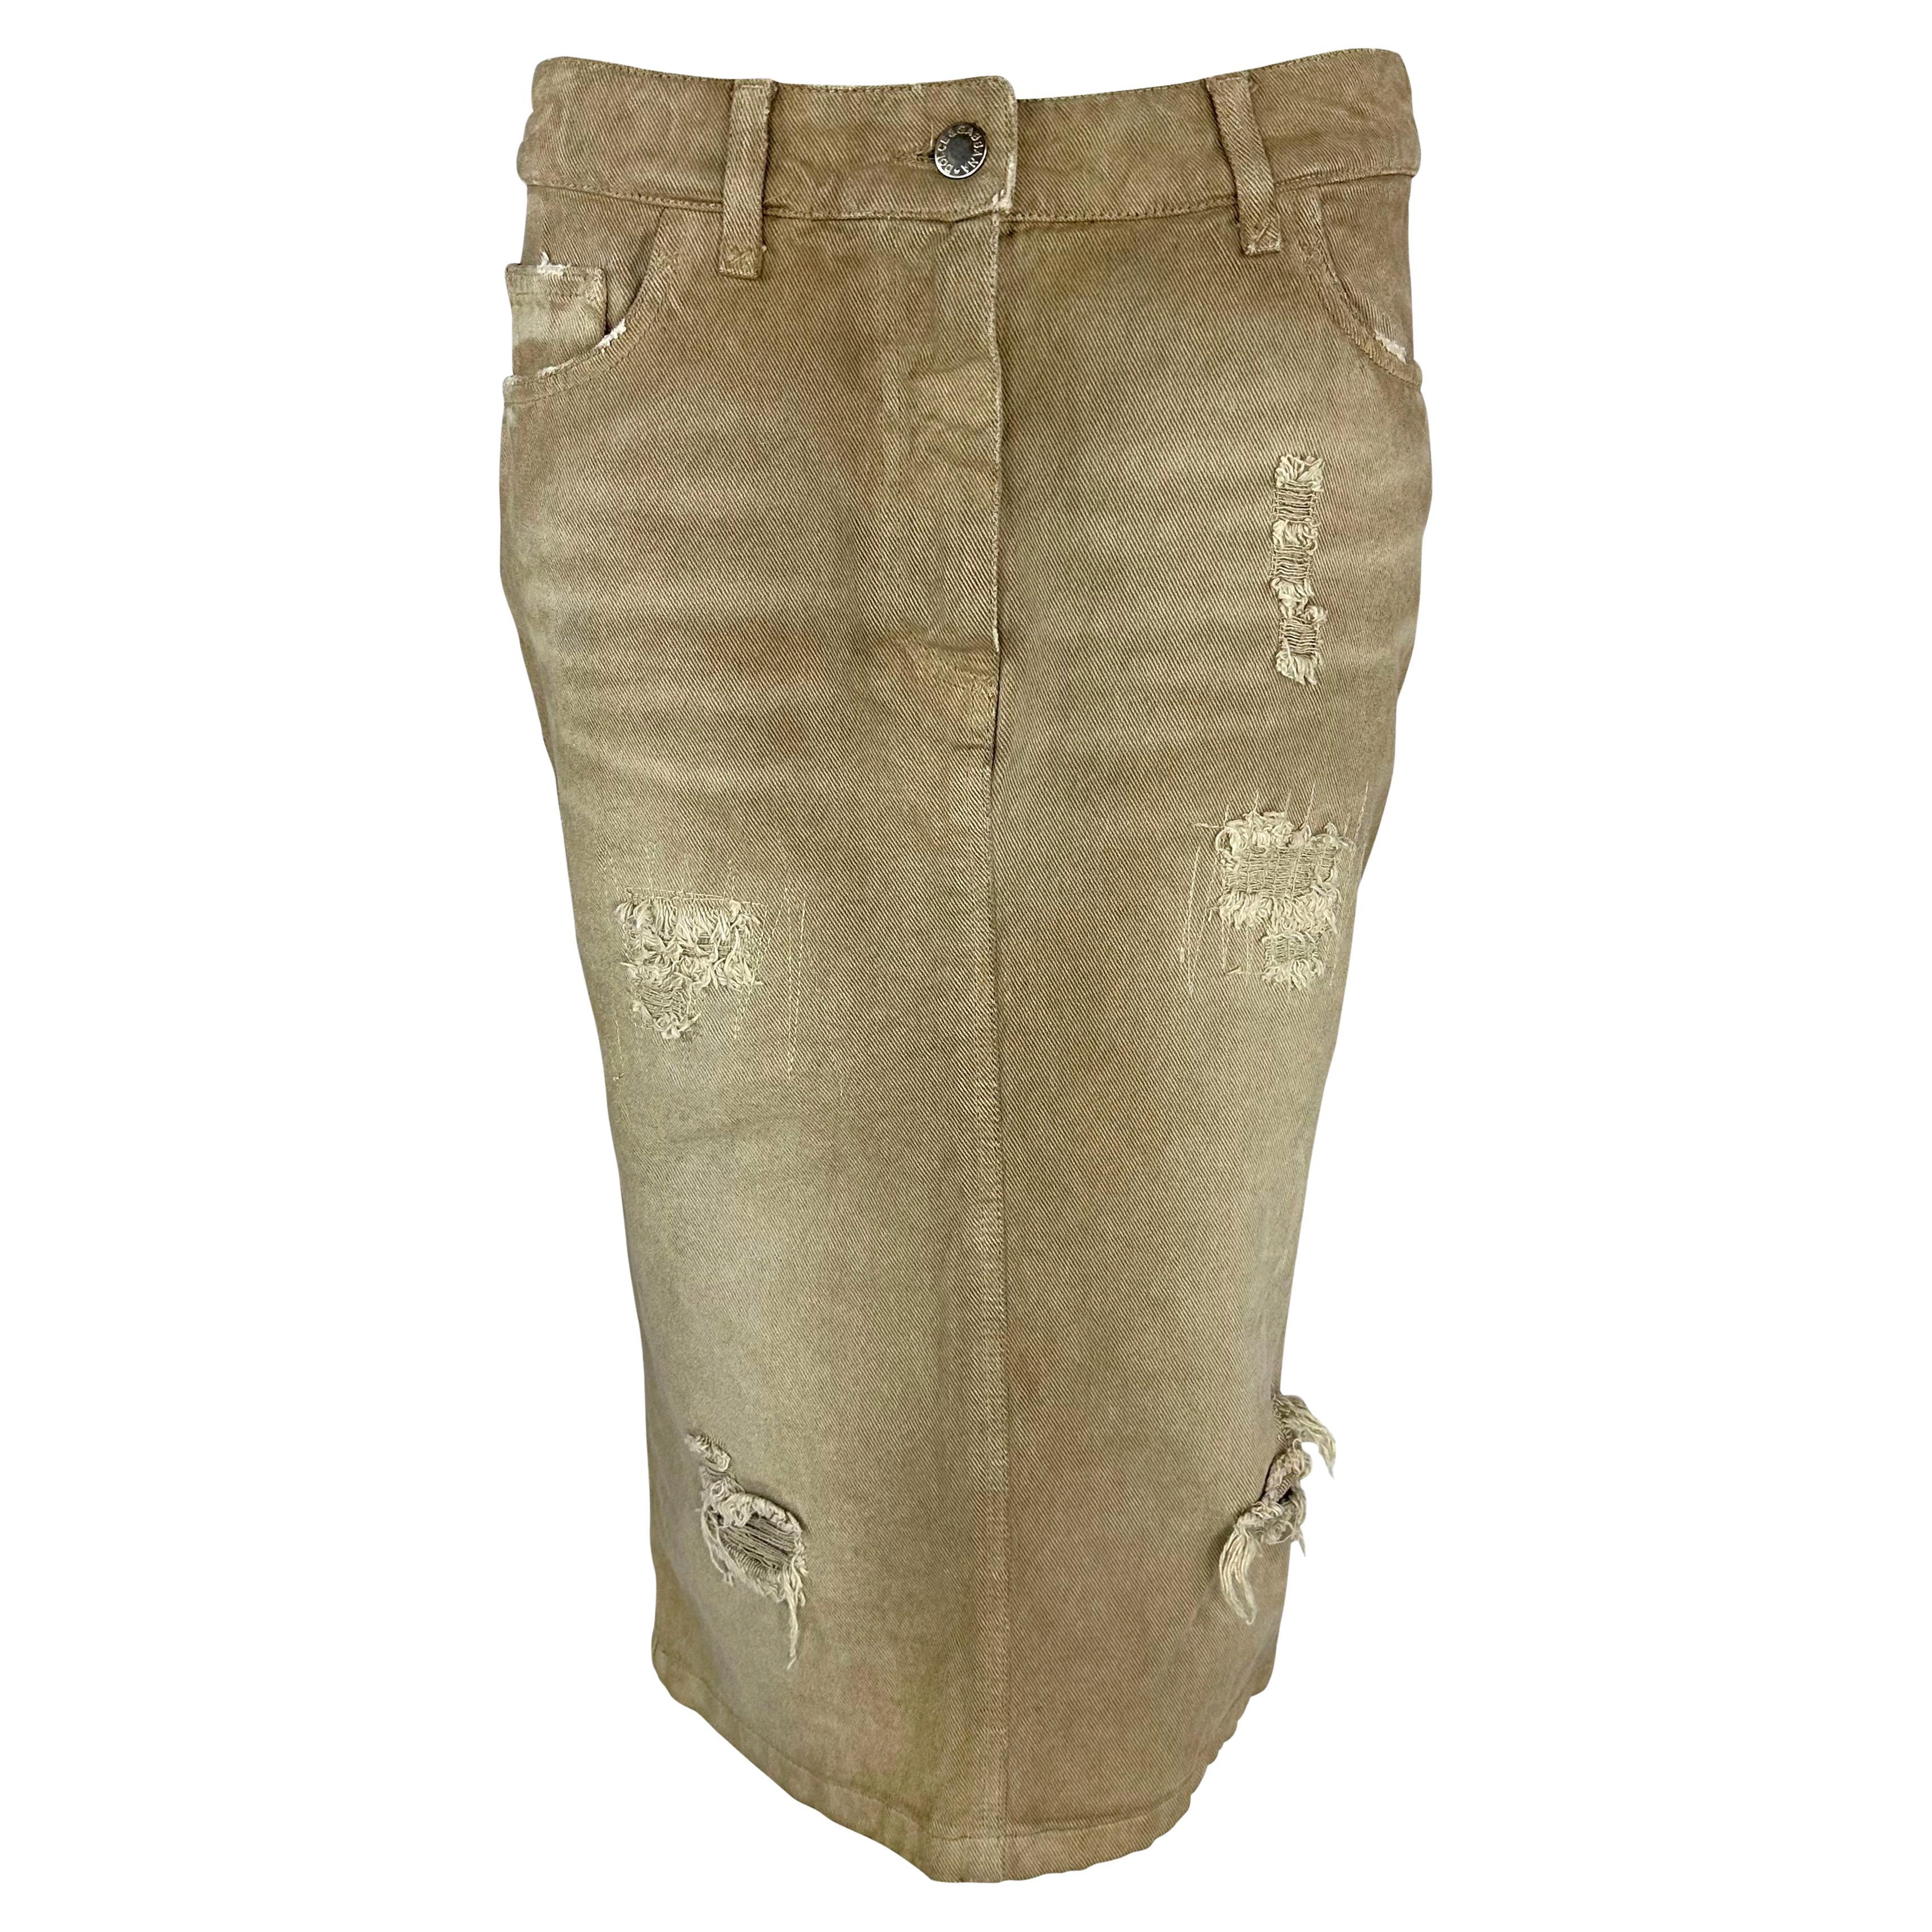 NWT Early 2000s Dolce & Gabbana Distressed Tan Denim Mid-Length Skirt For Sale